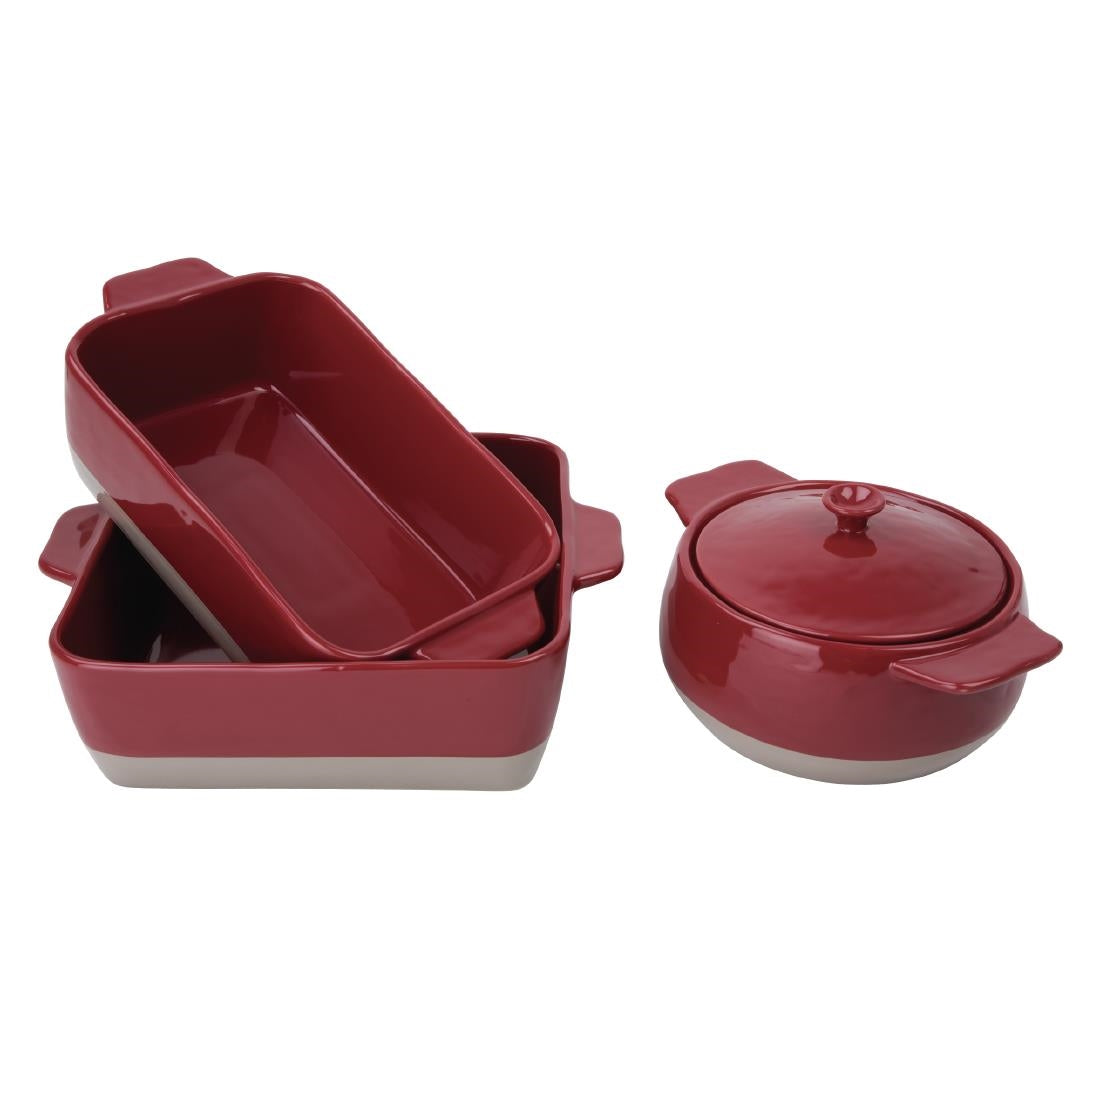 DB527 Olympia Red And Taupe Ceramic Roasting Dish 4.2Ltr JD Catering Equipment Solutions Ltd